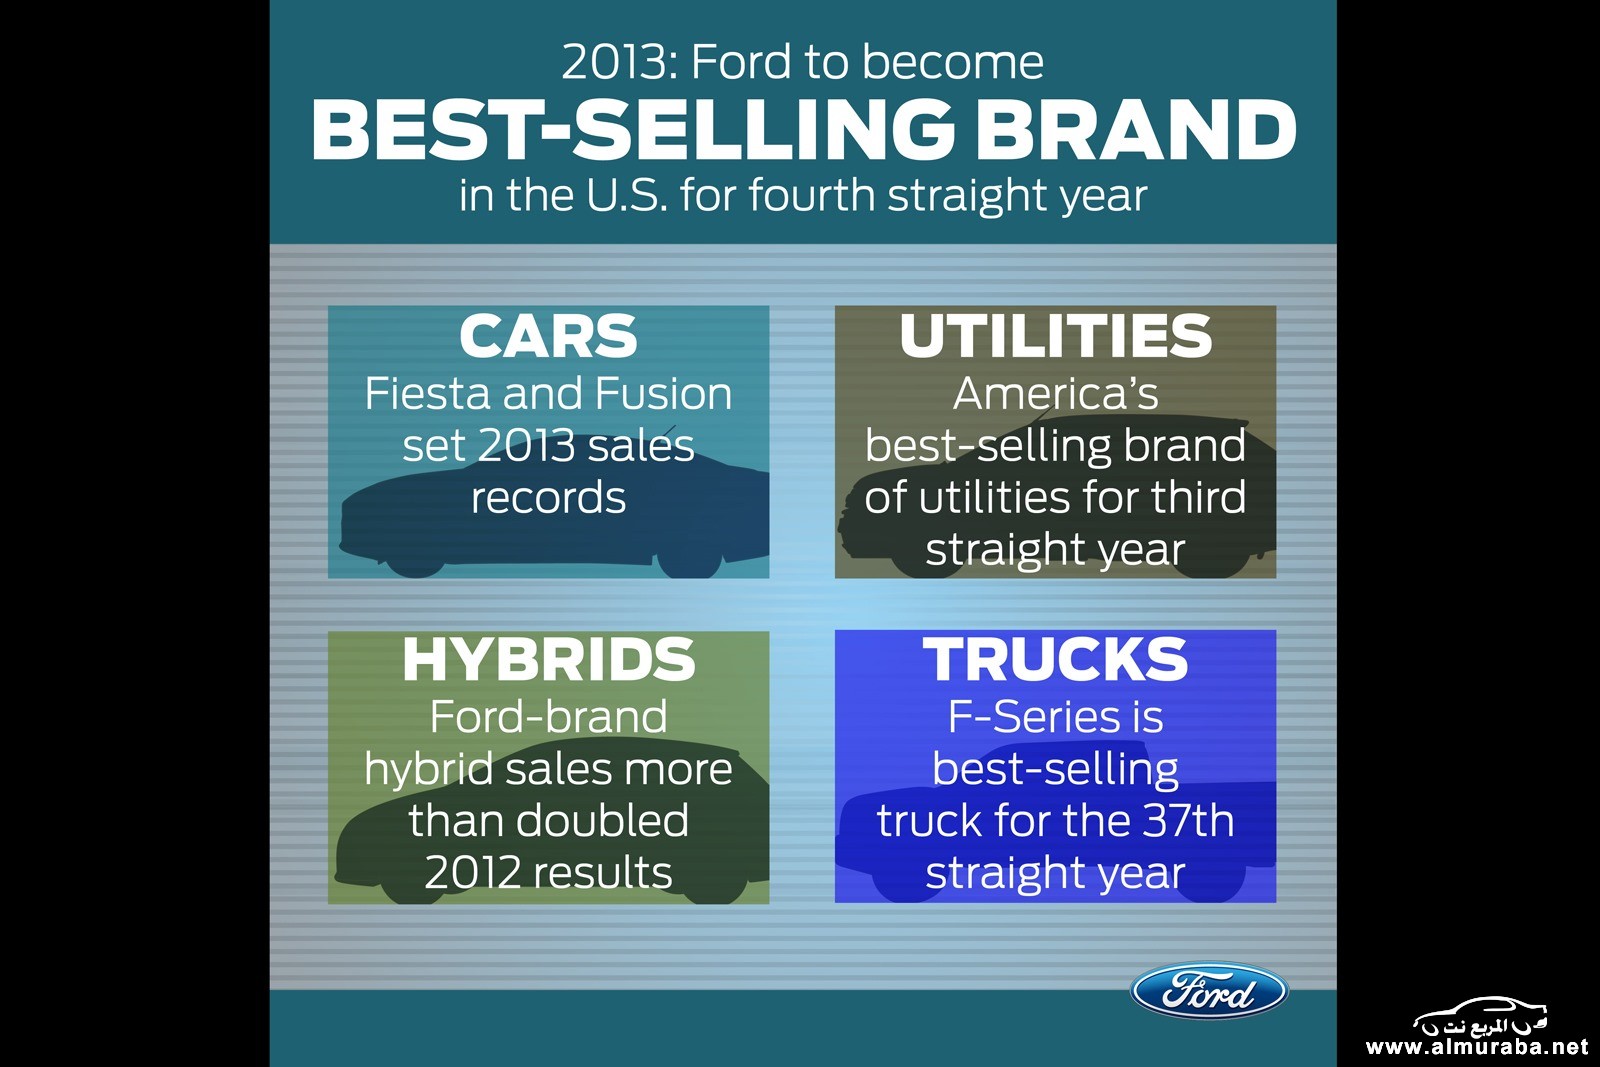 BestSelling_Brand_in_US_all[3]